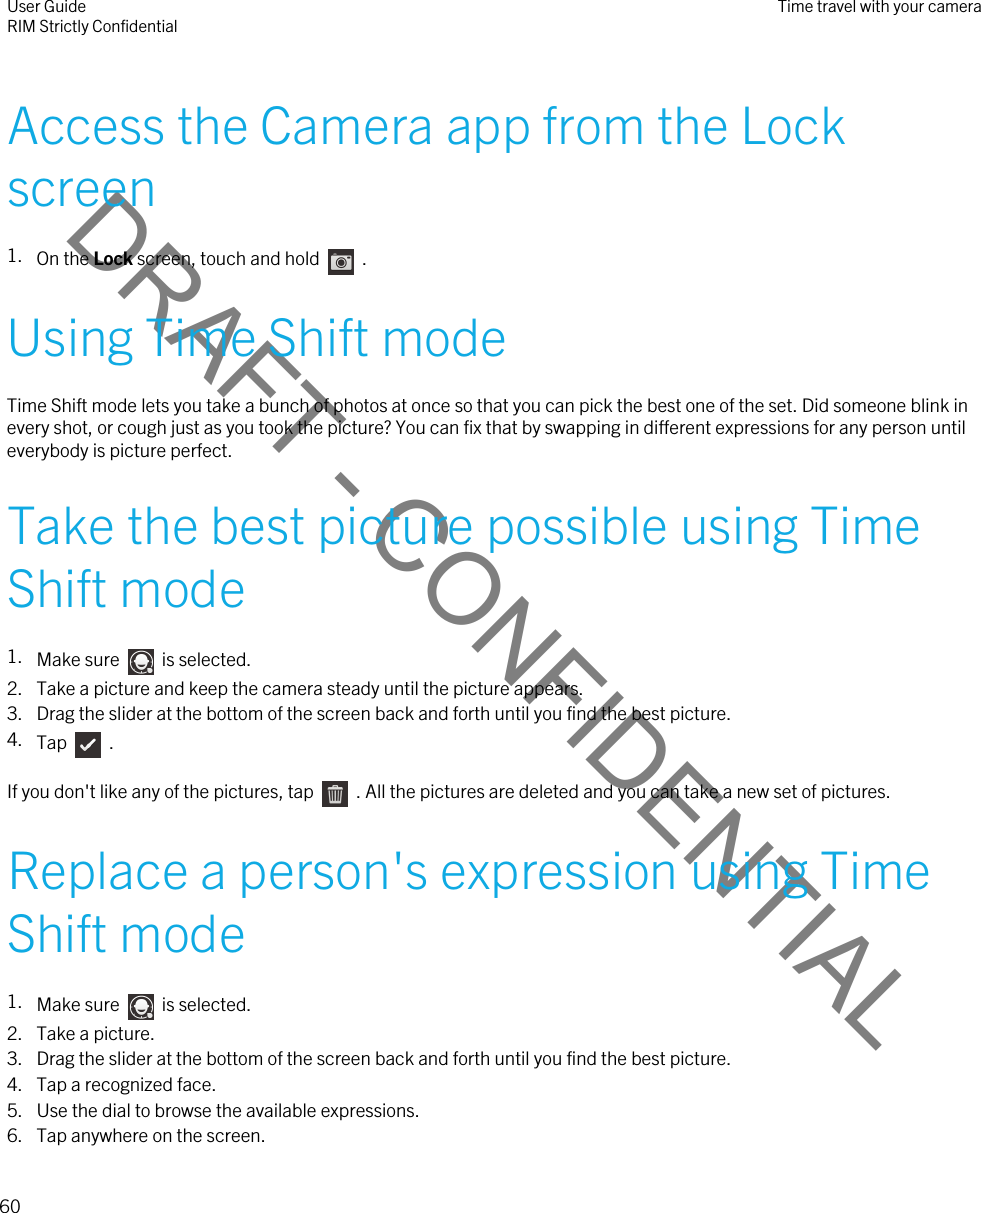 DRAFT - CONFIDENTIALAccess the Camera app from the Lock screen1. On the Lock screen, touch and hold    .Using Time Shift modeTime Shift mode lets you take a bunch of photos at once so that you can pick the best one of the set. Did someone blink in every shot, or cough just as you took the picture? You can fix that by swapping in different expressions for any person until everybody is picture perfect.Take the best picture possible using Time Shift mode1. Make sure    is selected.2. Take a picture and keep the camera steady until the picture appears.3. Drag the slider at the bottom of the screen back and forth until you find the best picture.4. Tap    .If you don&apos;t like any of the pictures, tap    . All the pictures are deleted and you can take a new set of pictures.Replace a person&apos;s expression using Time Shift mode1. Make sure    is selected.2. Take a picture.3. Drag the slider at the bottom of the screen back and forth until you find the best picture.4. Tap a recognized face.5. Use the dial to browse the available expressions.6. Tap anywhere on the screen.User GuideRIM Strictly Confidential Time travel with your camera60 